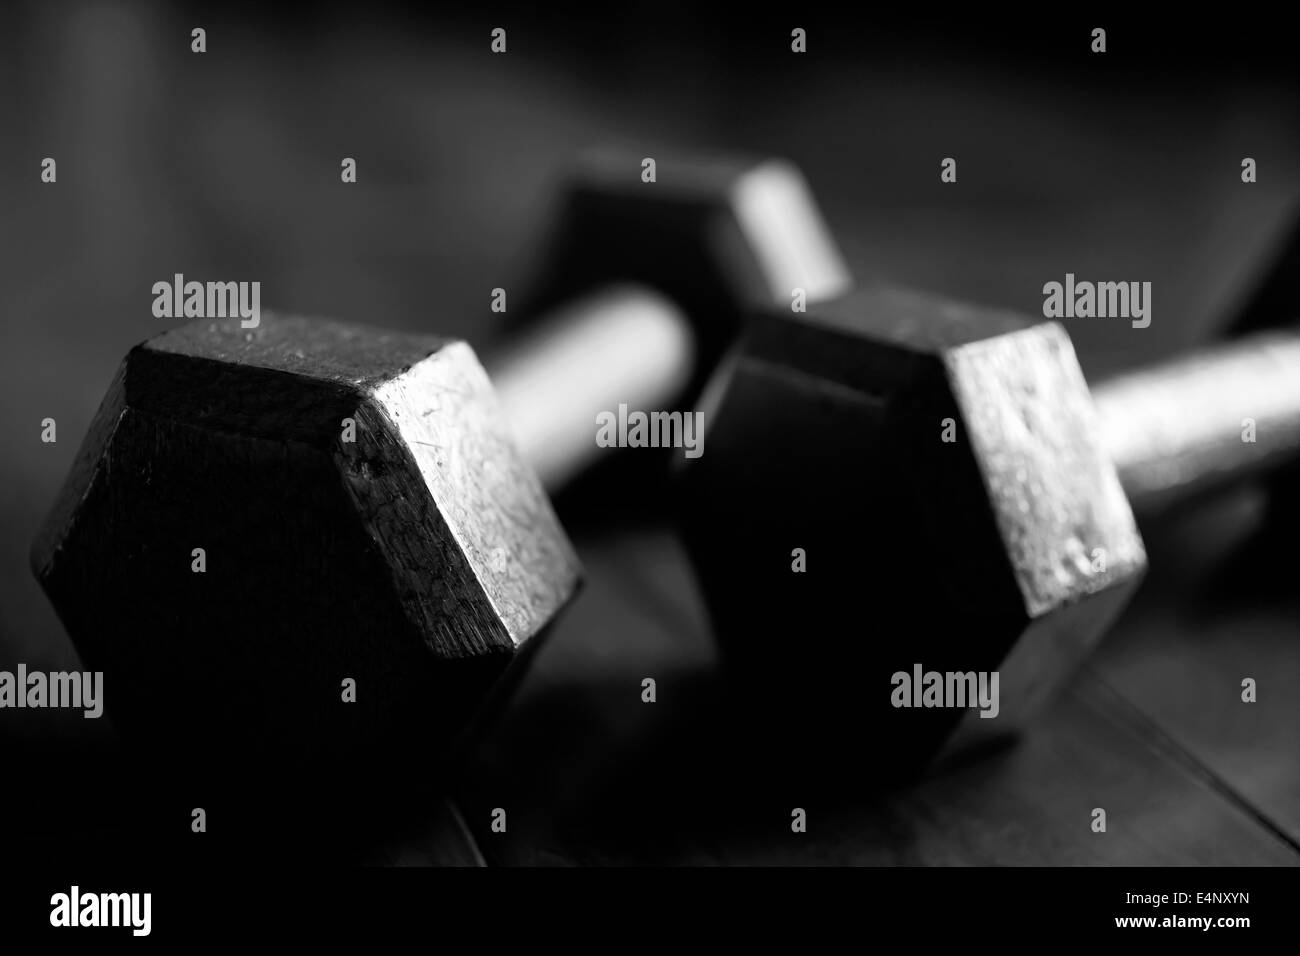 Close-up of dumbbells Stock Photo